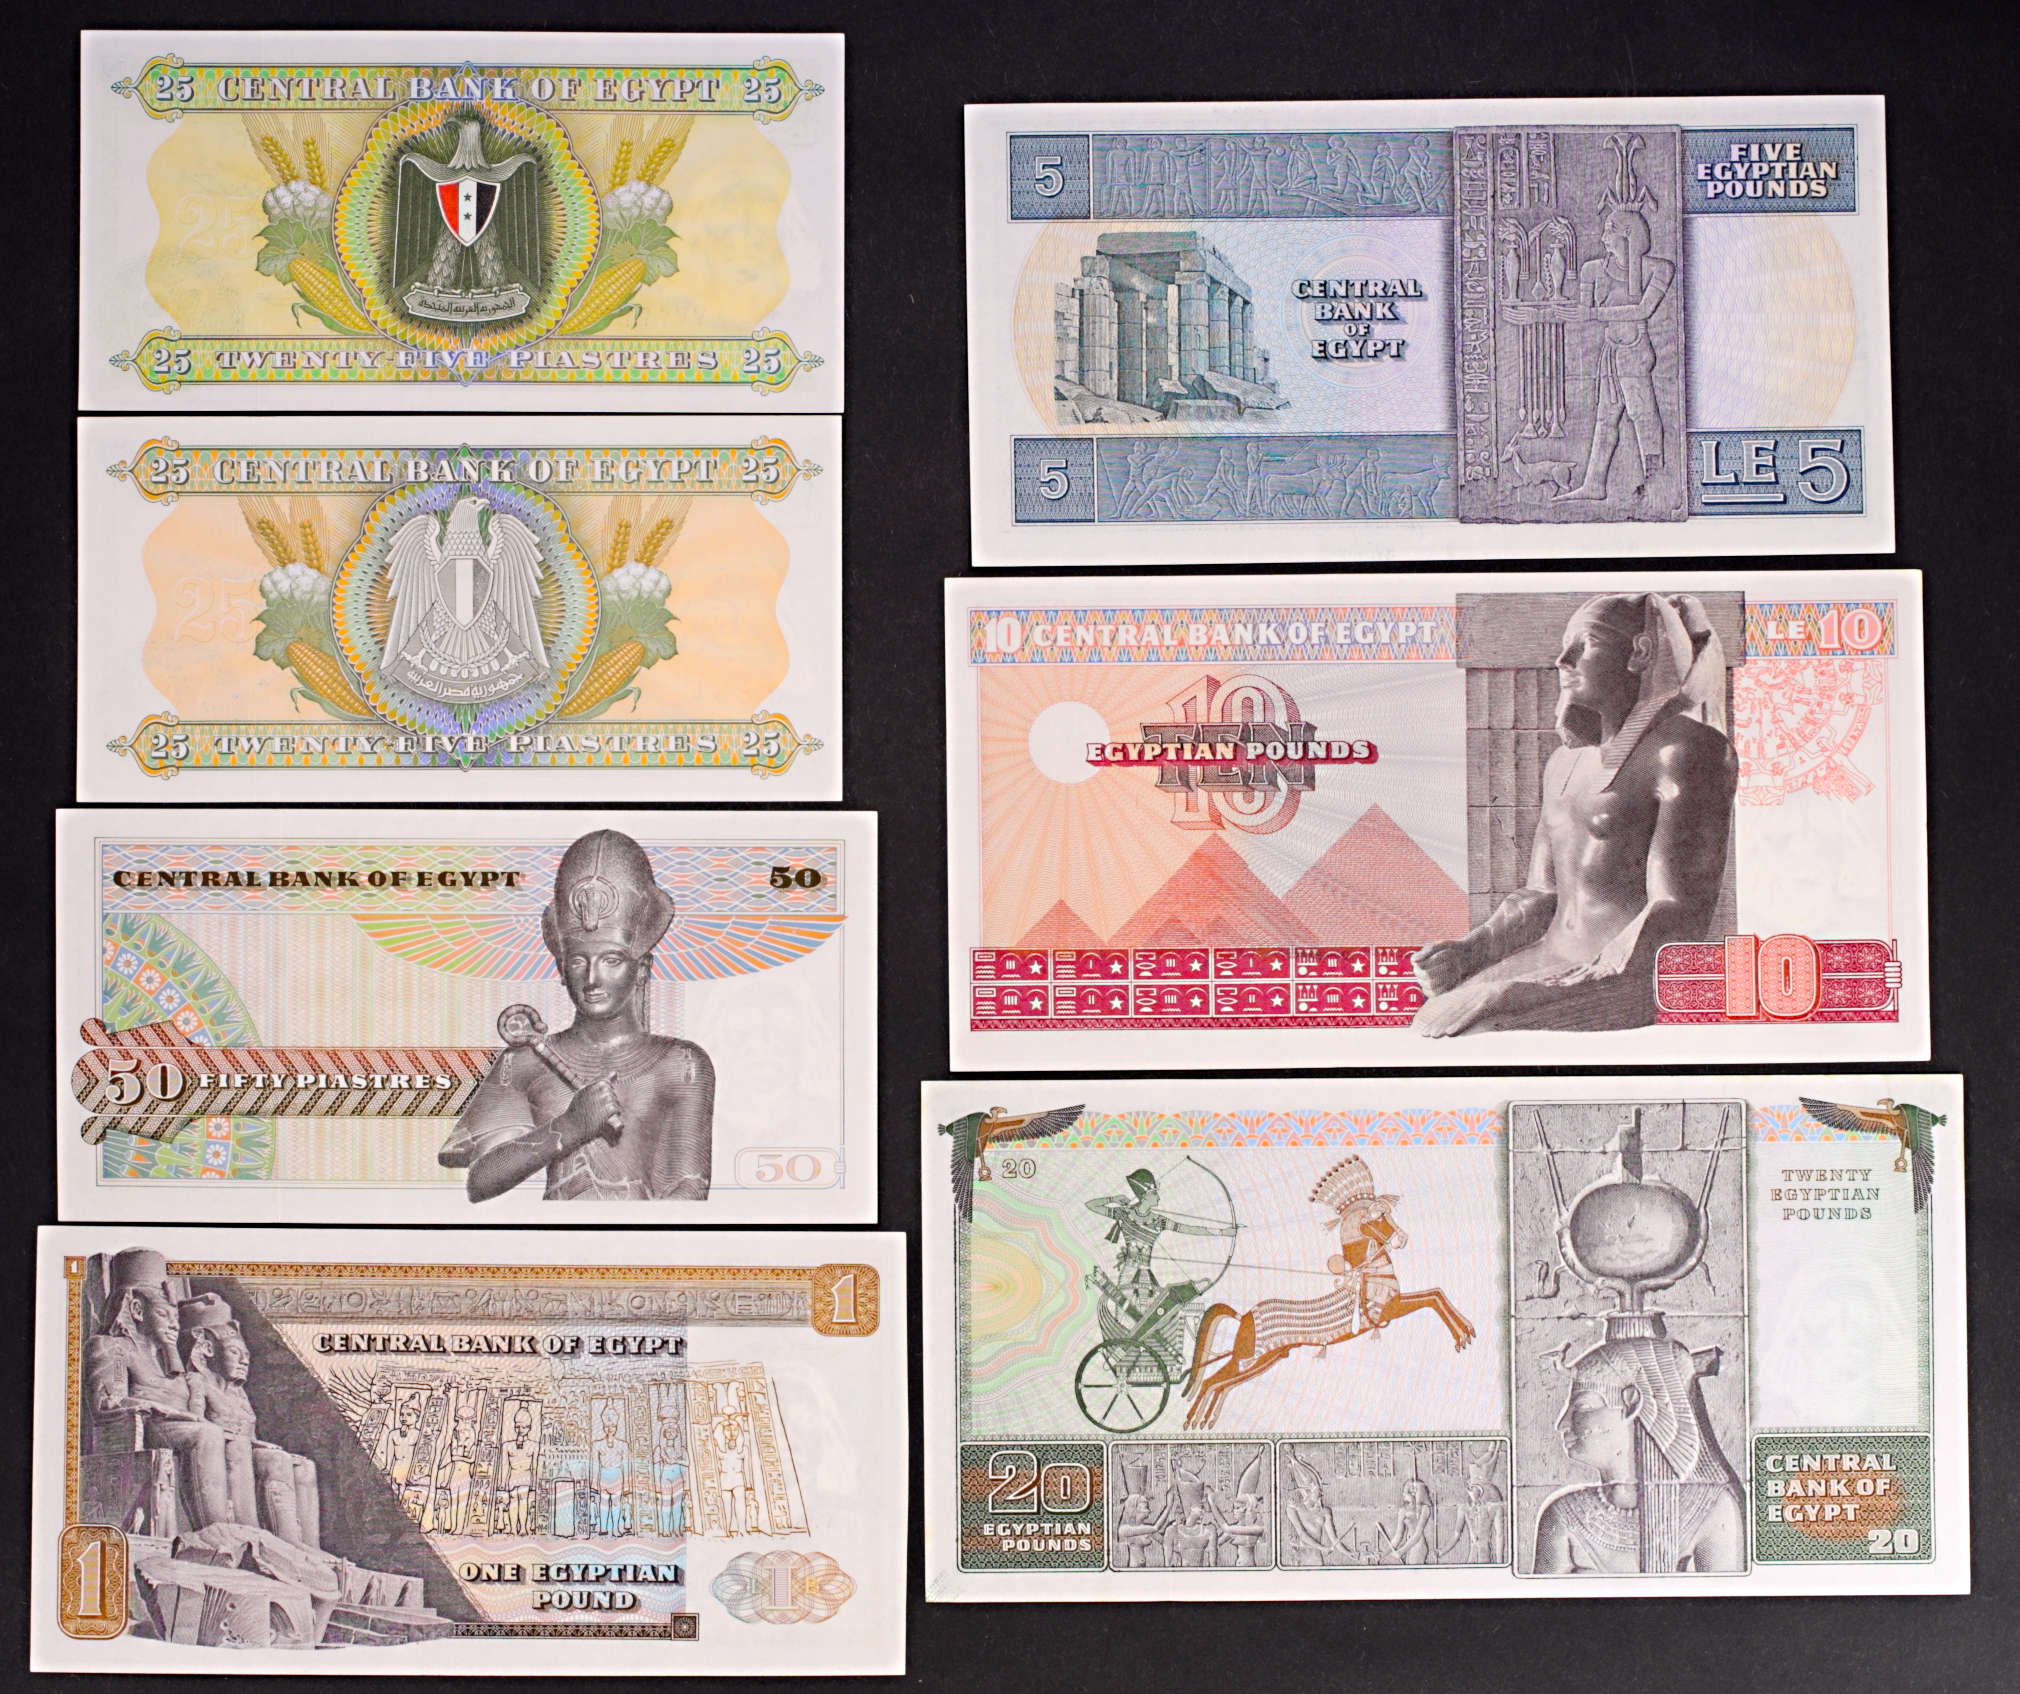 Egypt - 7 uncirculated banknotes; 25 Piastres, 1974; 25 and 50 Piastres, 1, 5, 10 and 20 Pounds - Image 2 of 2